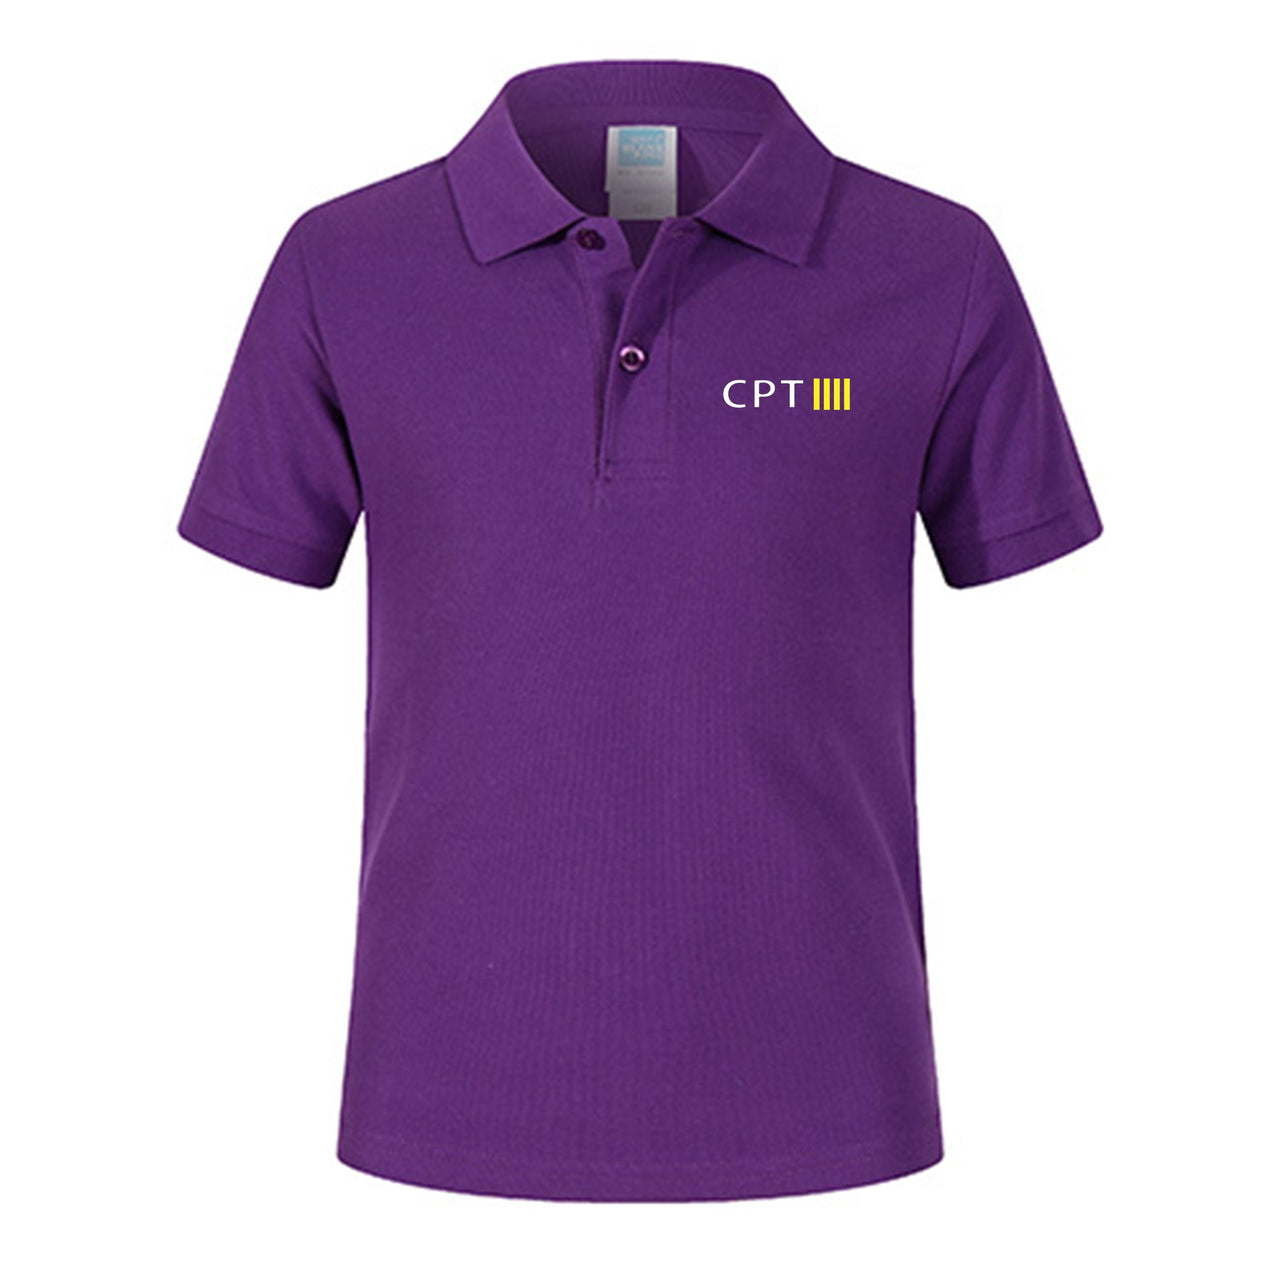 CPT & 4 Lines Designed Children Polo T-Shirts